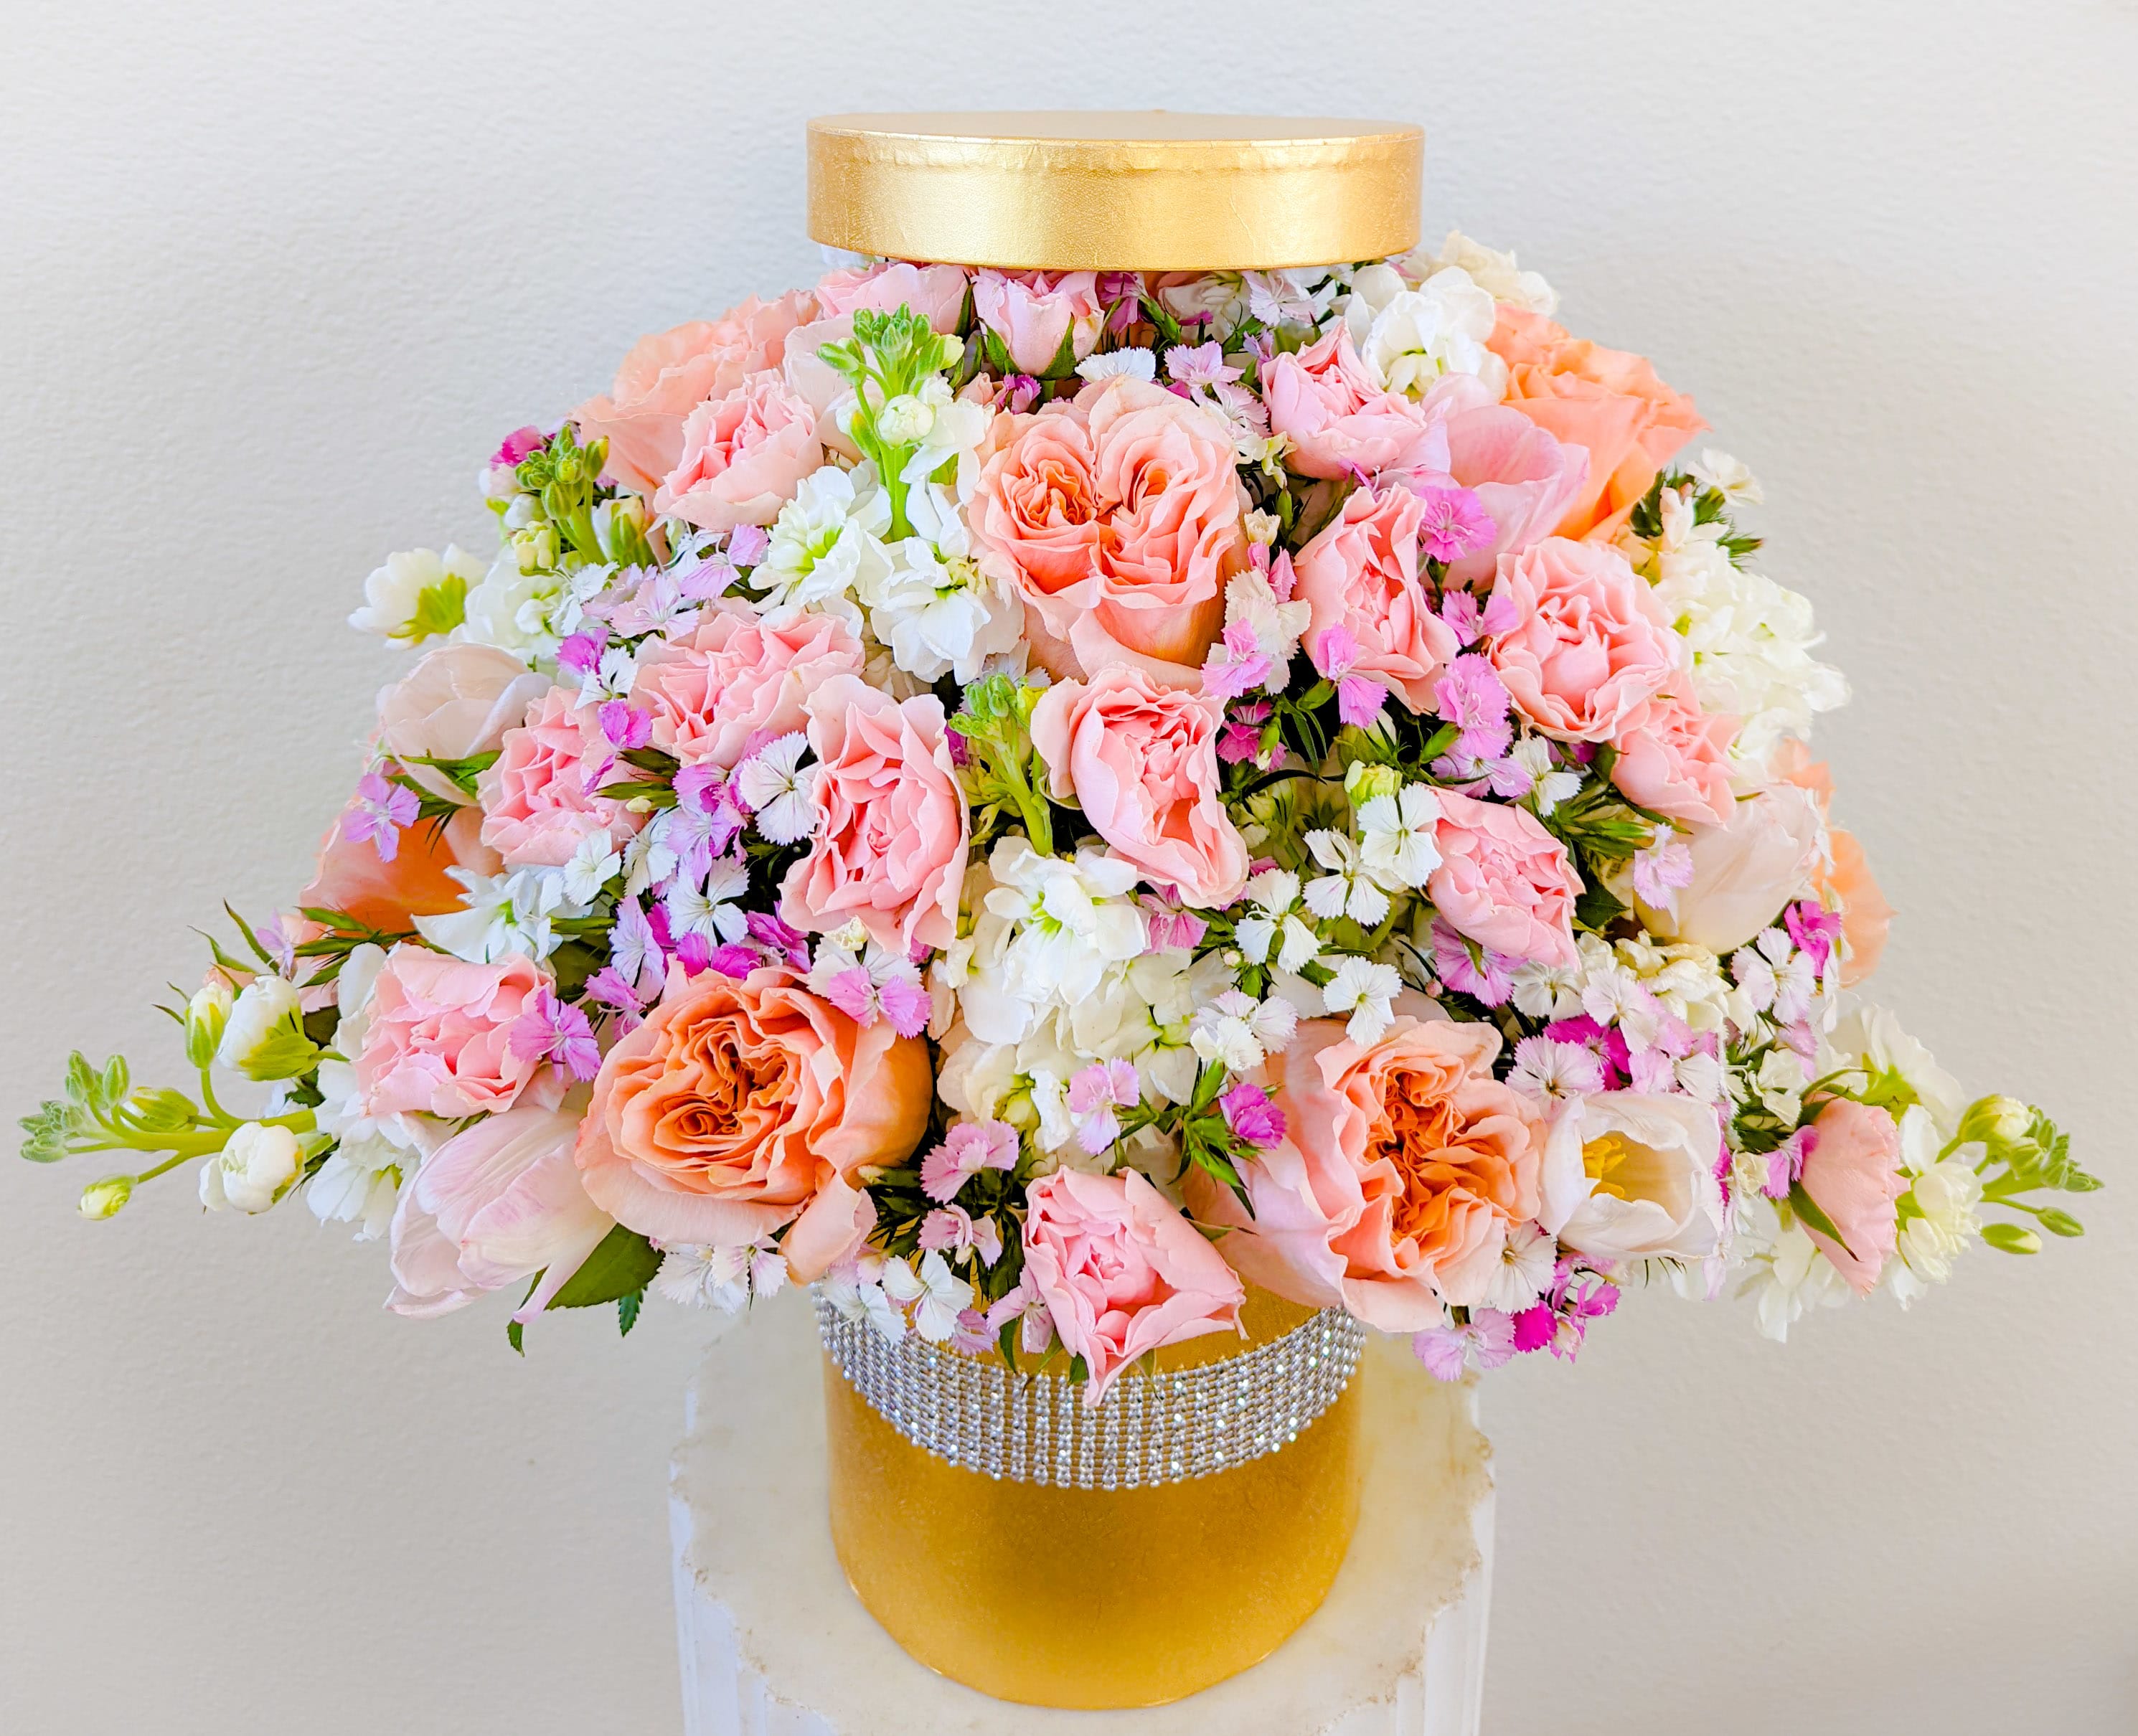 Gift box with Roses and Tulips - Elegant cylinder gift box overflowing with roses and Tulips.